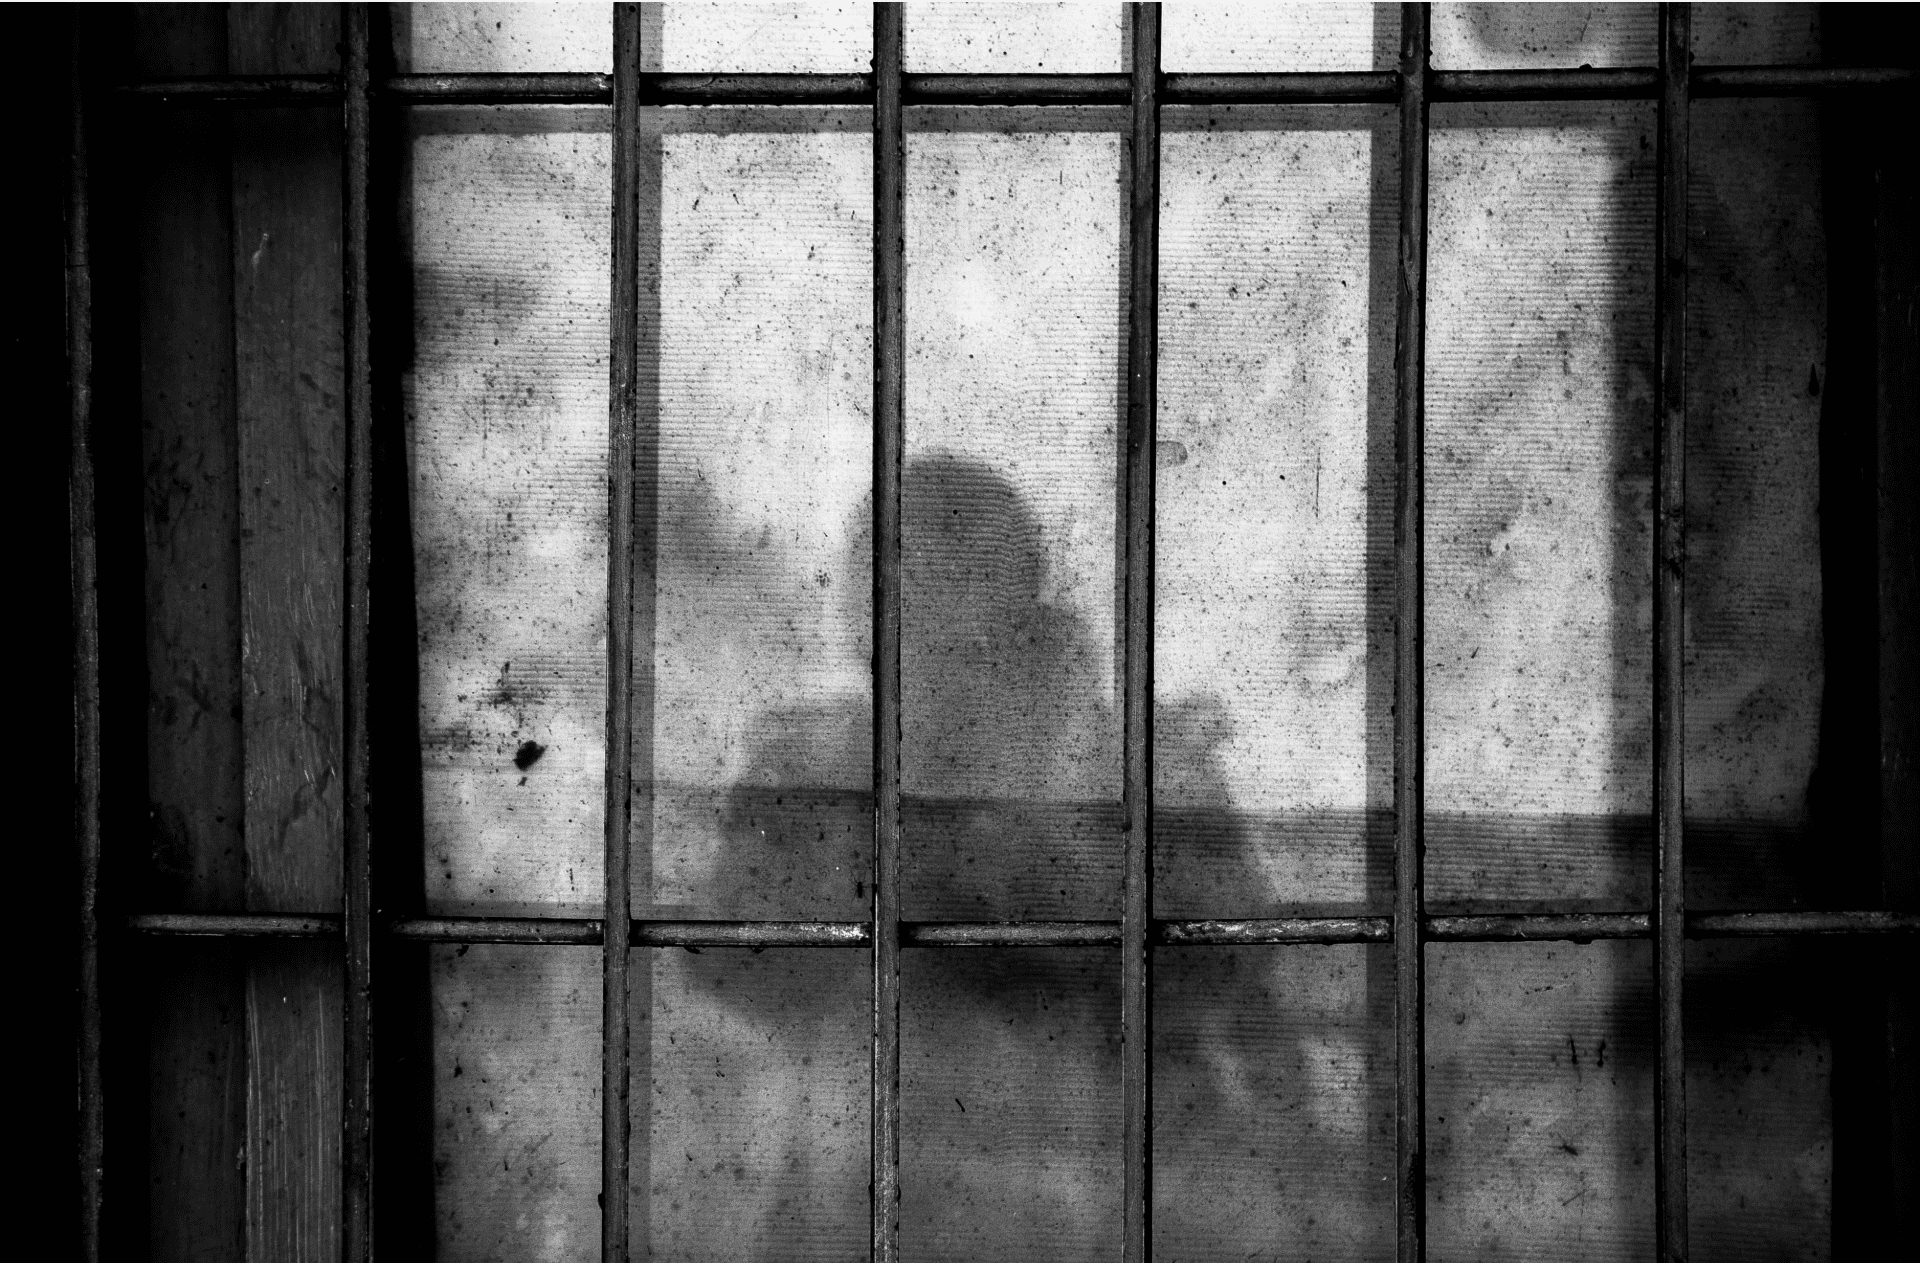 Image of a human shadow on a prison cell wall